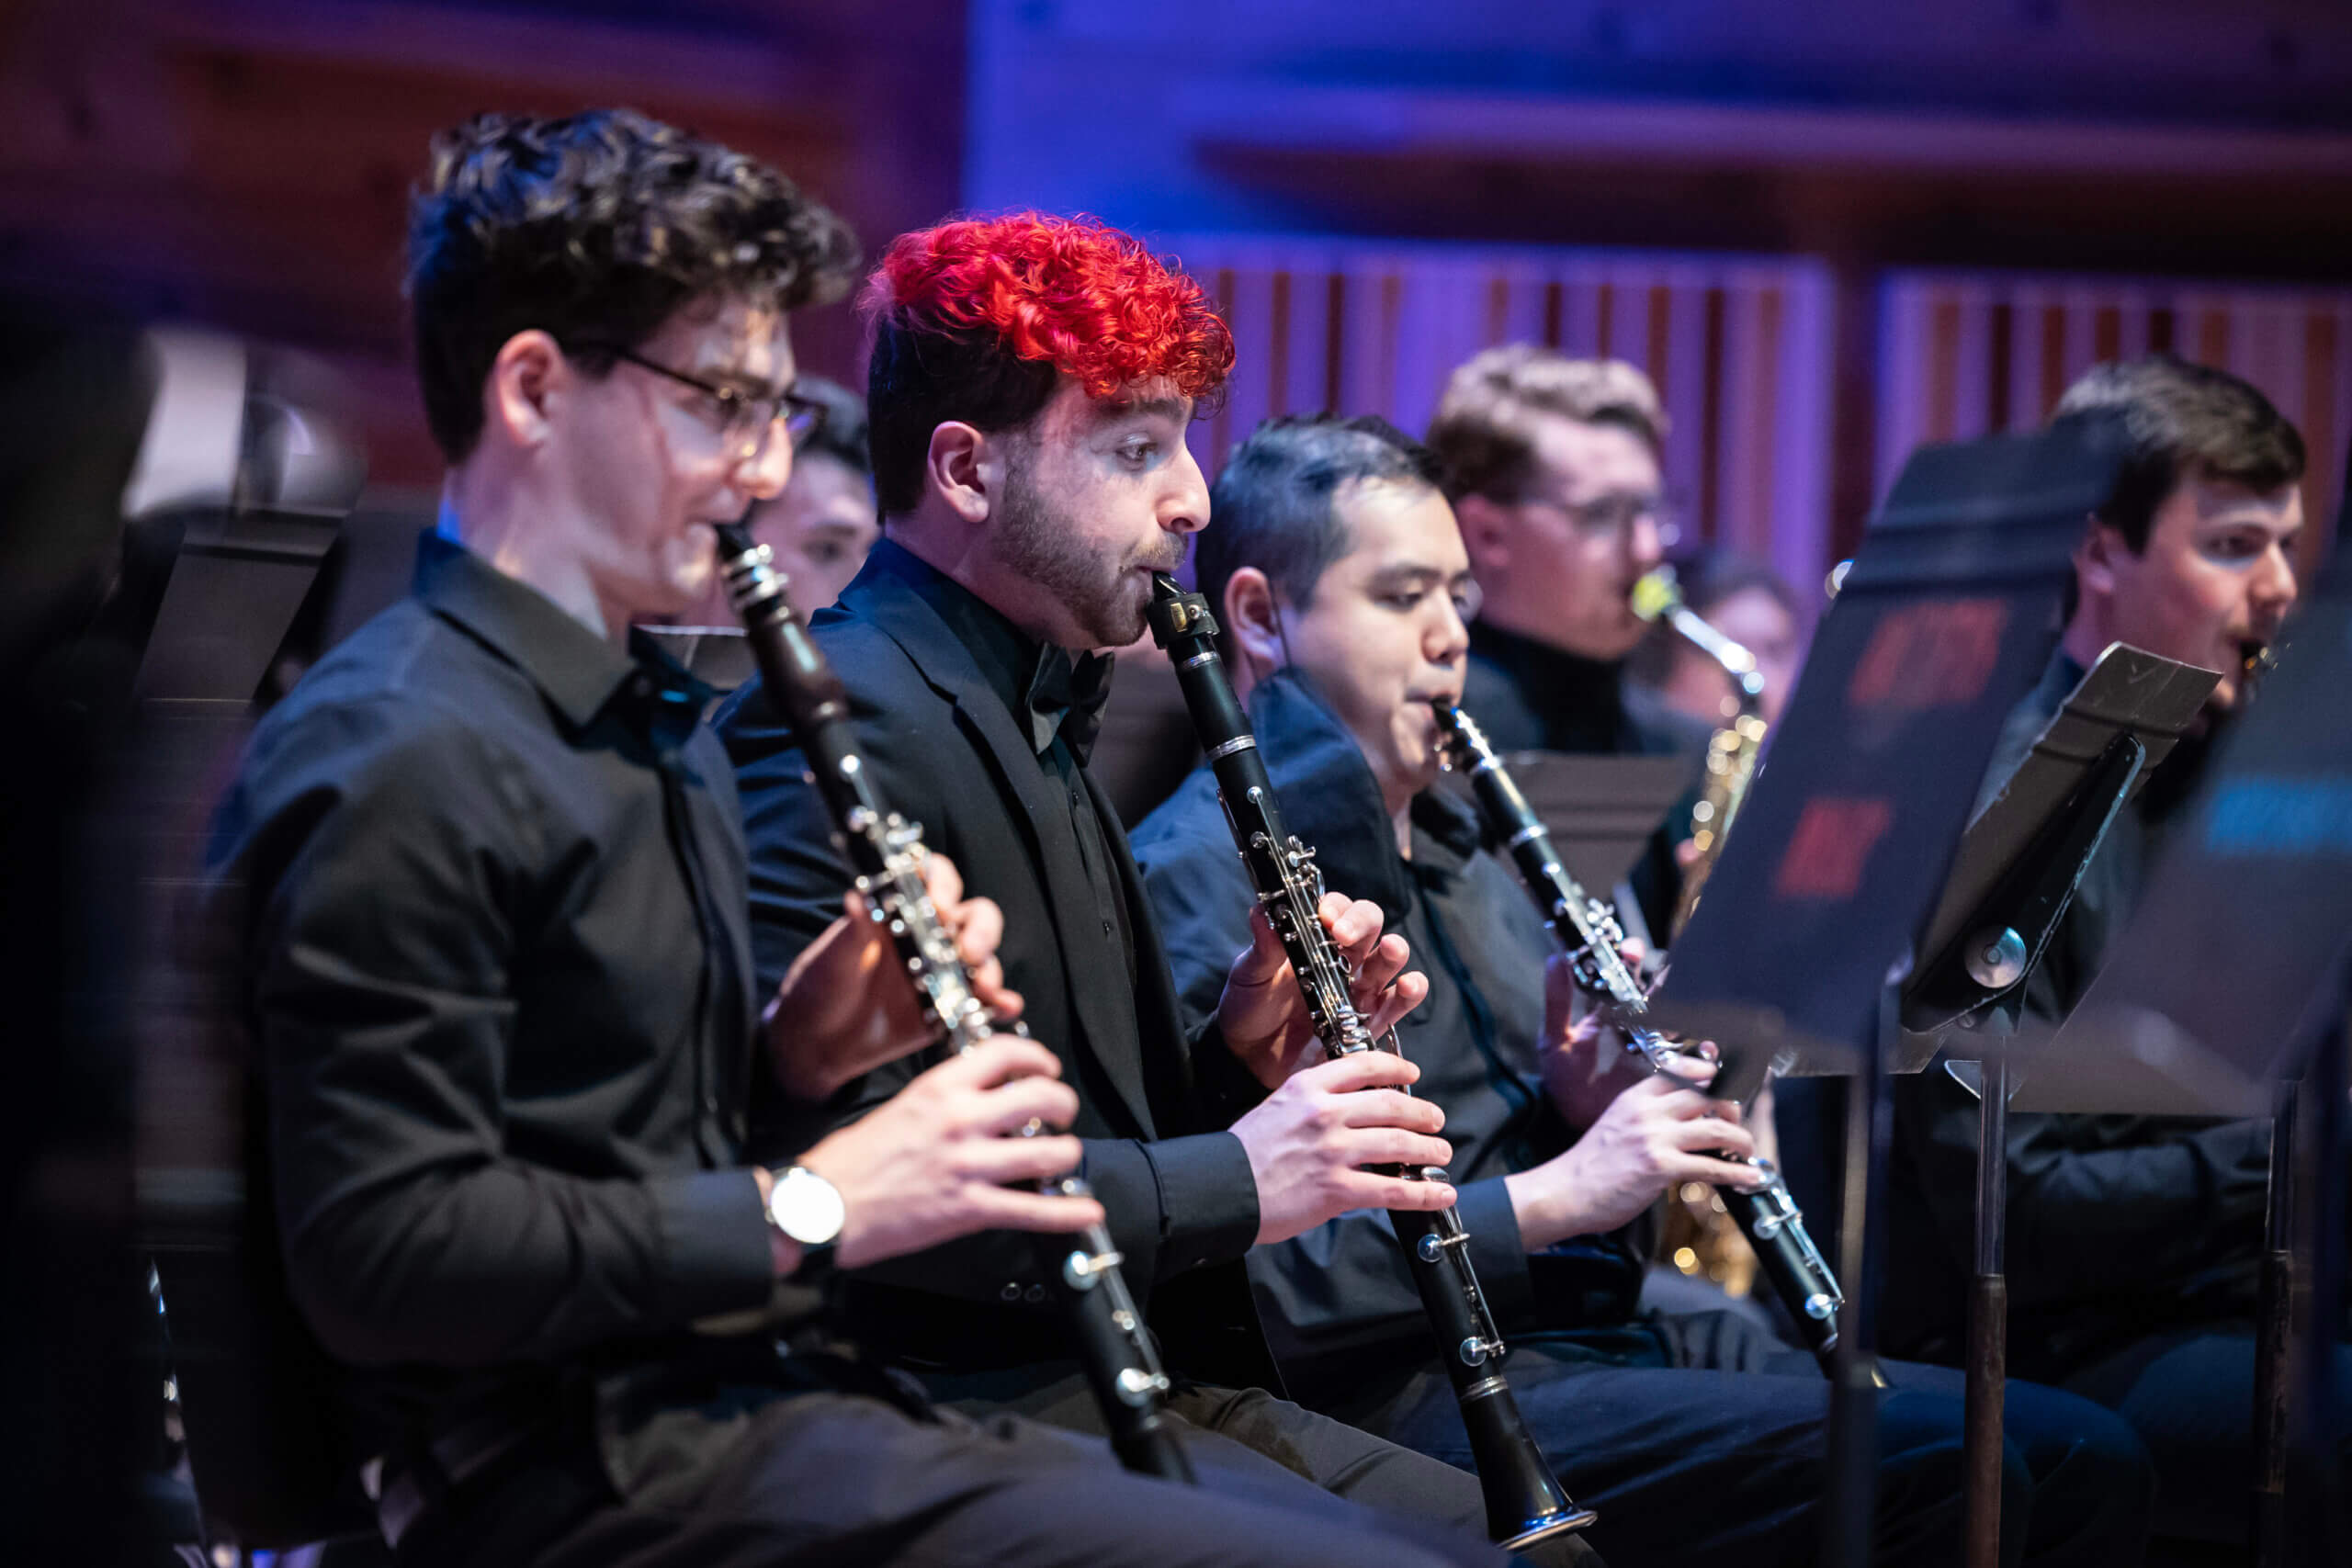 Three students play a wind instrument on stage in the foreground.The student in the middle has vibrant red hair.